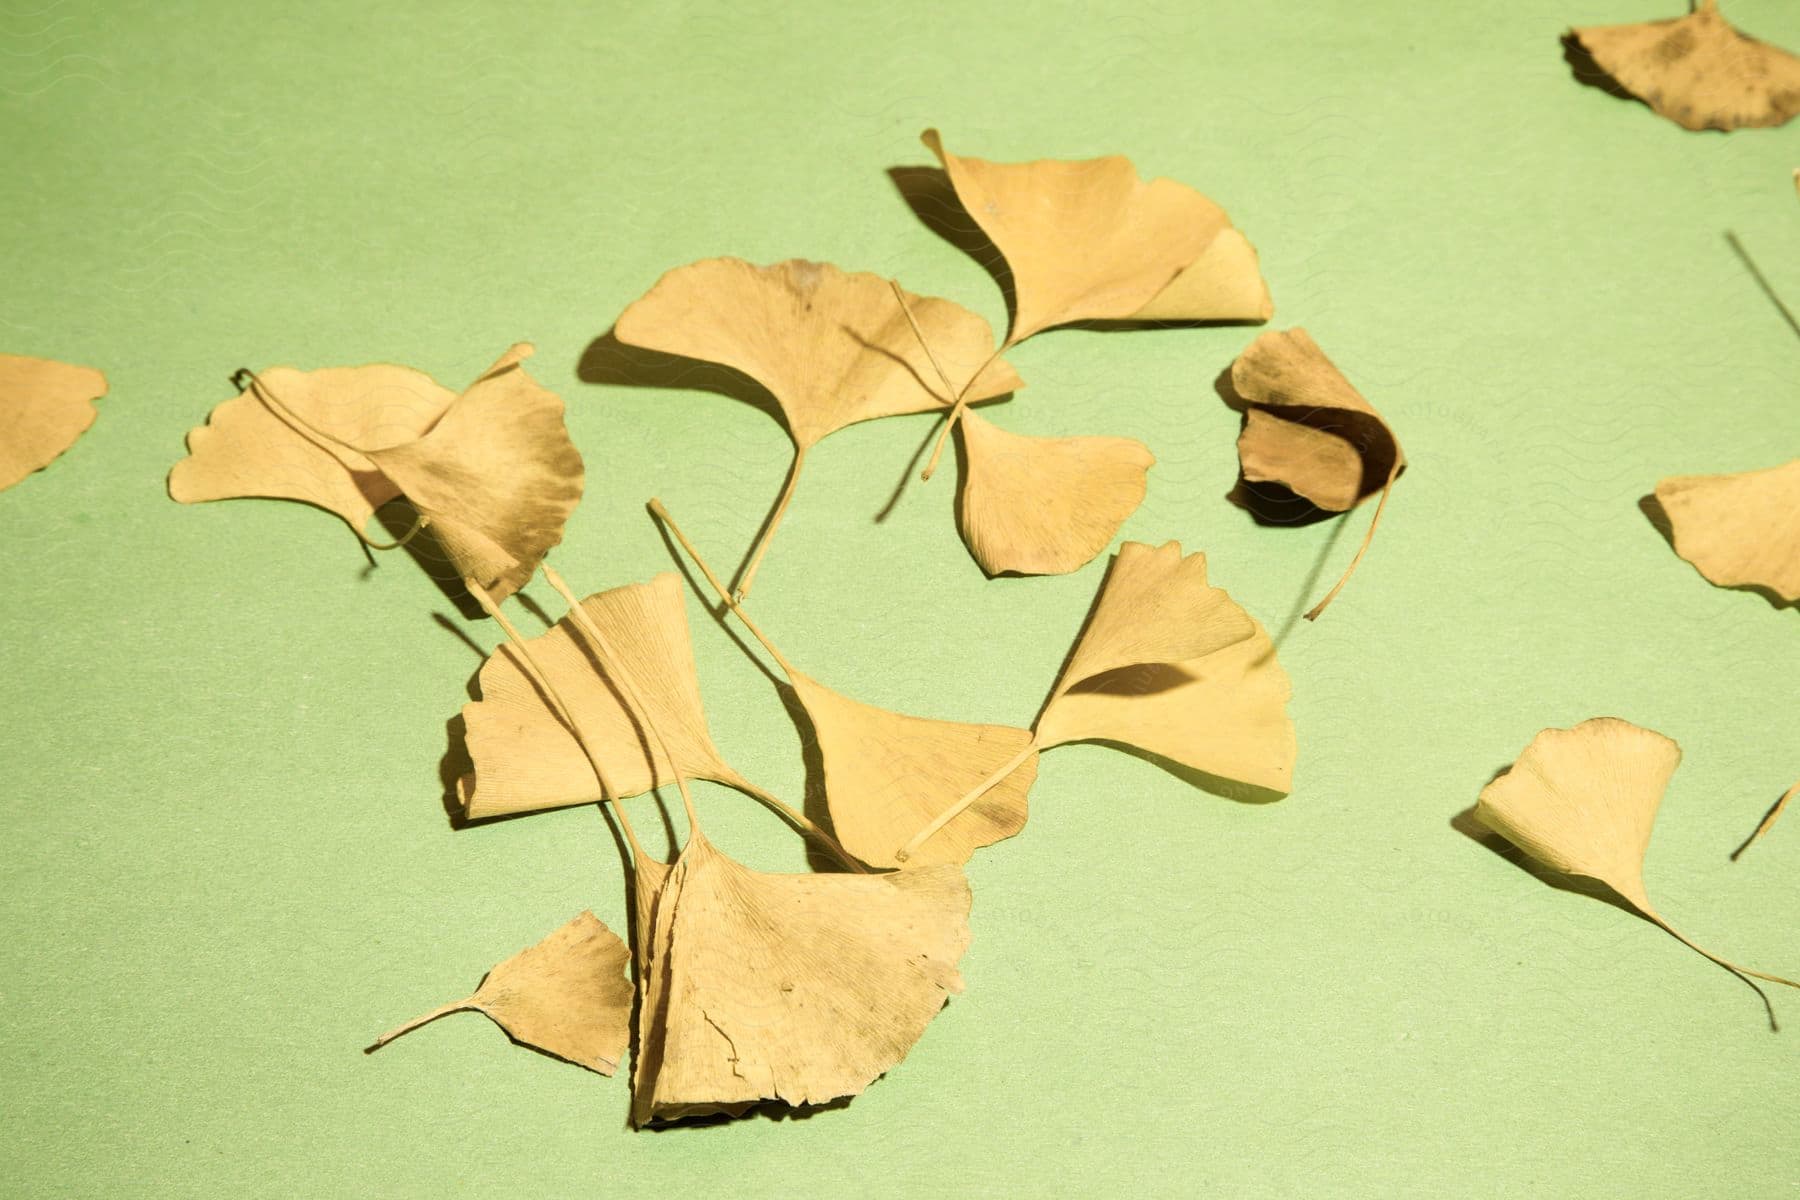 Still life of dry leaves on a light green background